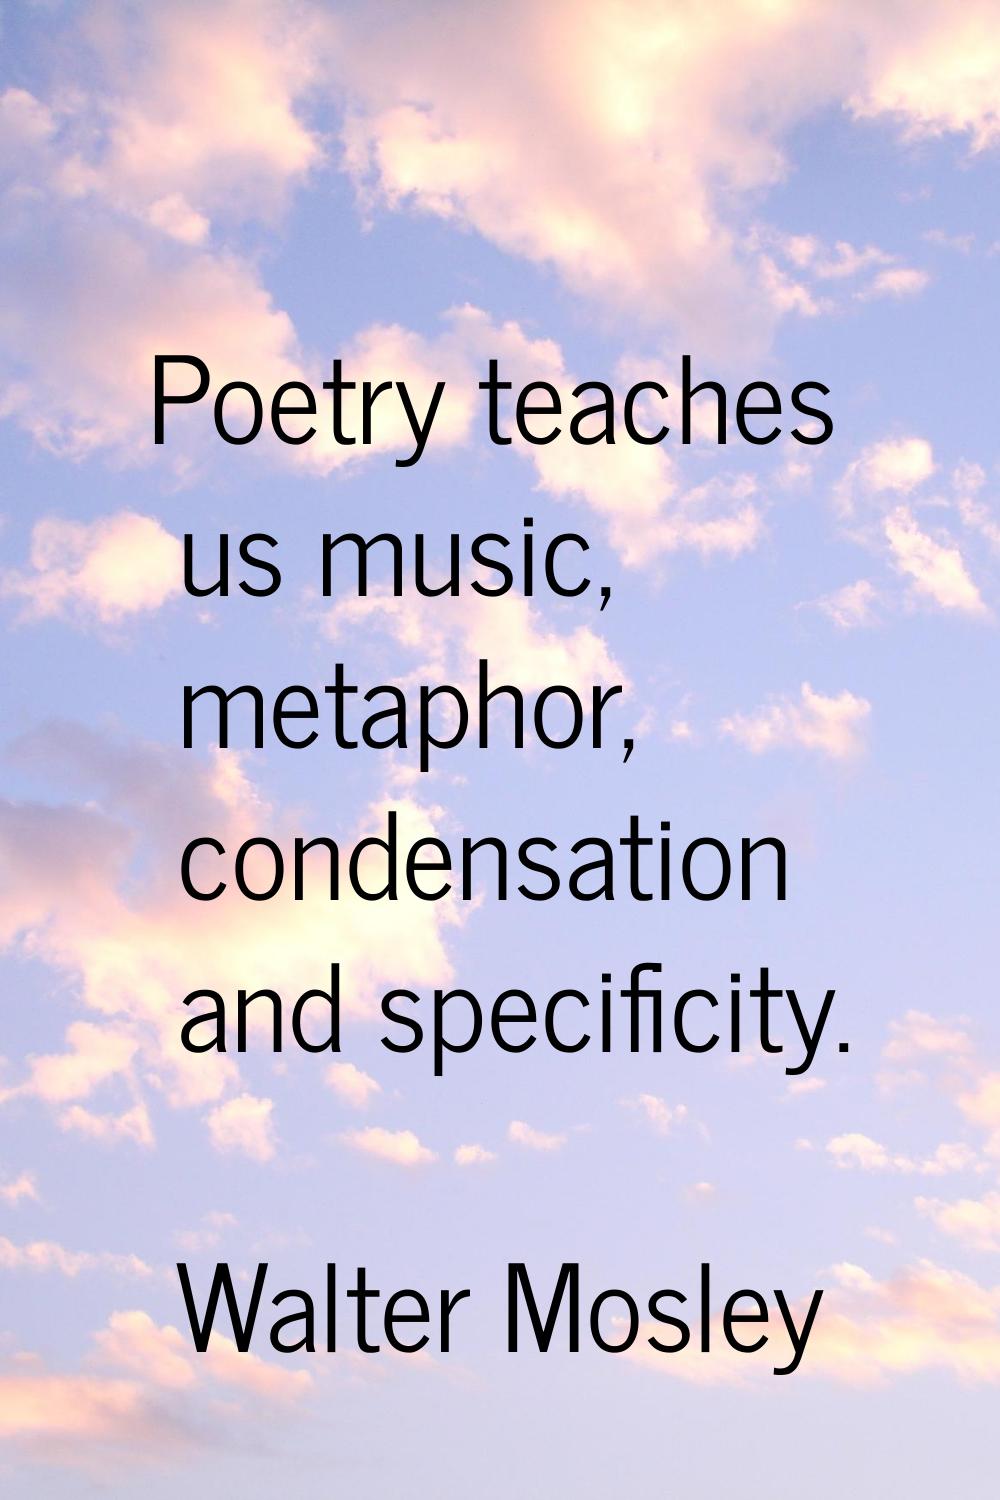 Poetry teaches us music, metaphor, condensation and specificity.